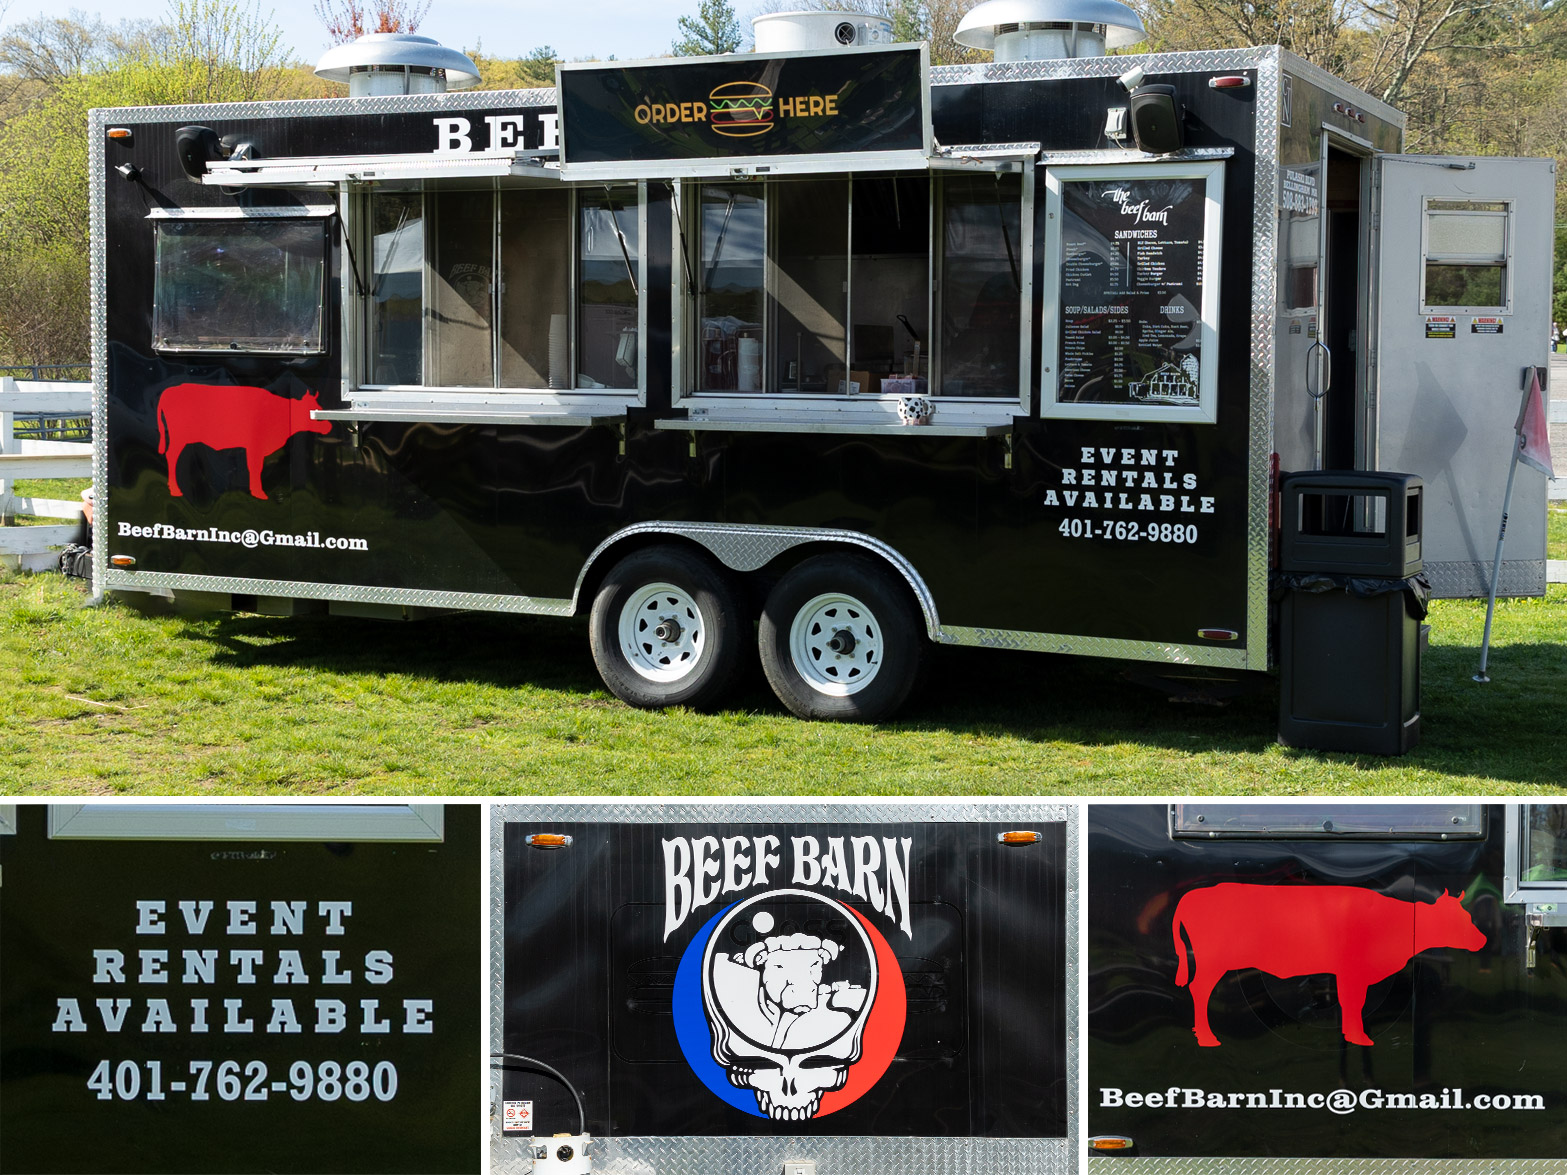 The Beef Barn Food Truck is ready for events across RI and MA